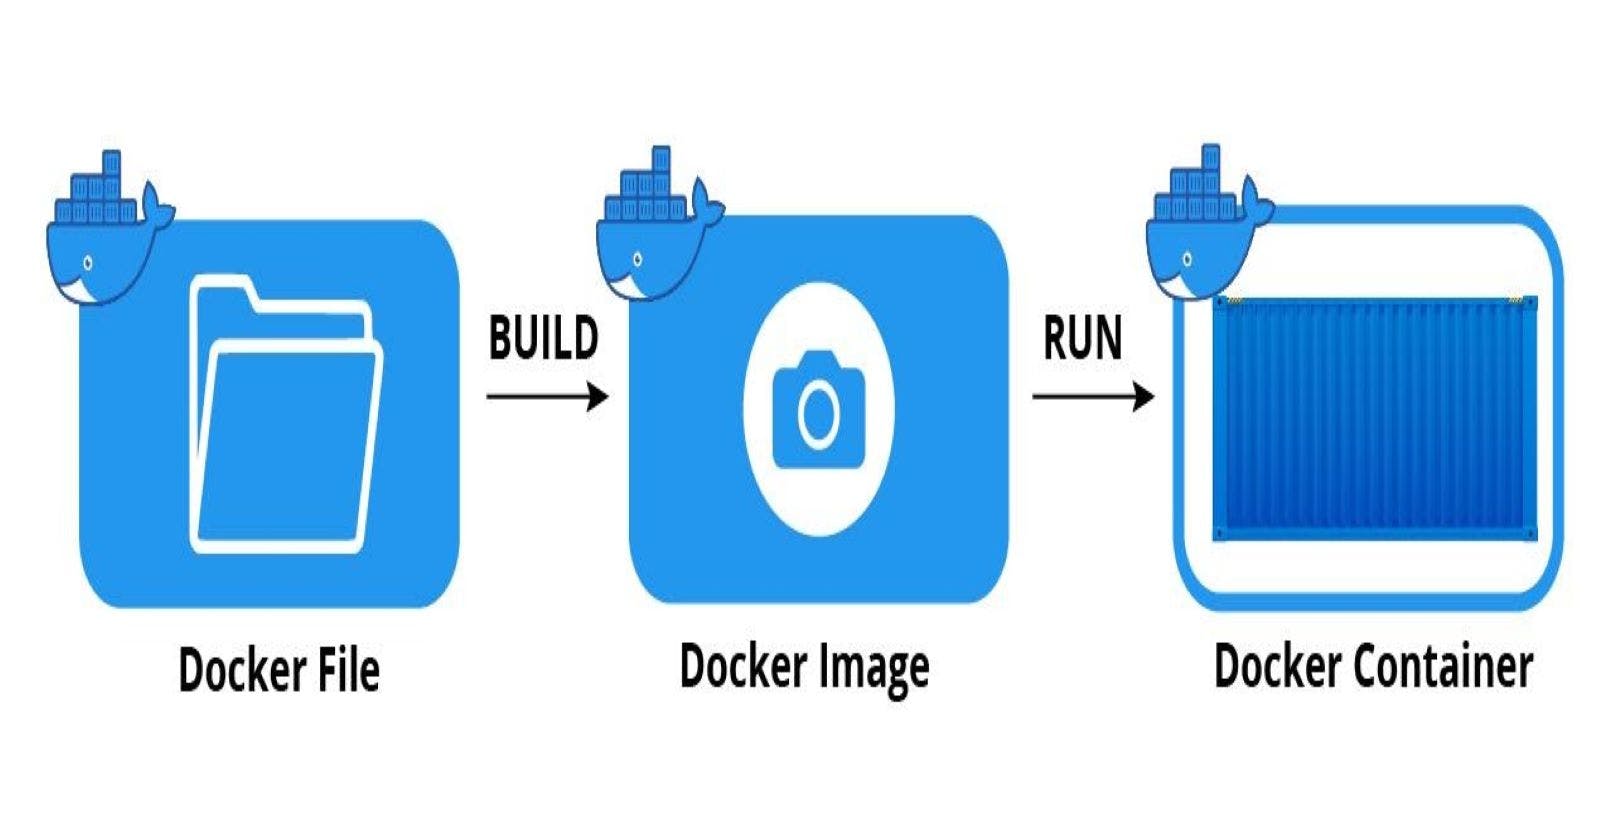 Step-by-Step Guide to Creating a Docker Image of your Application and Uploading it to Docker Hub